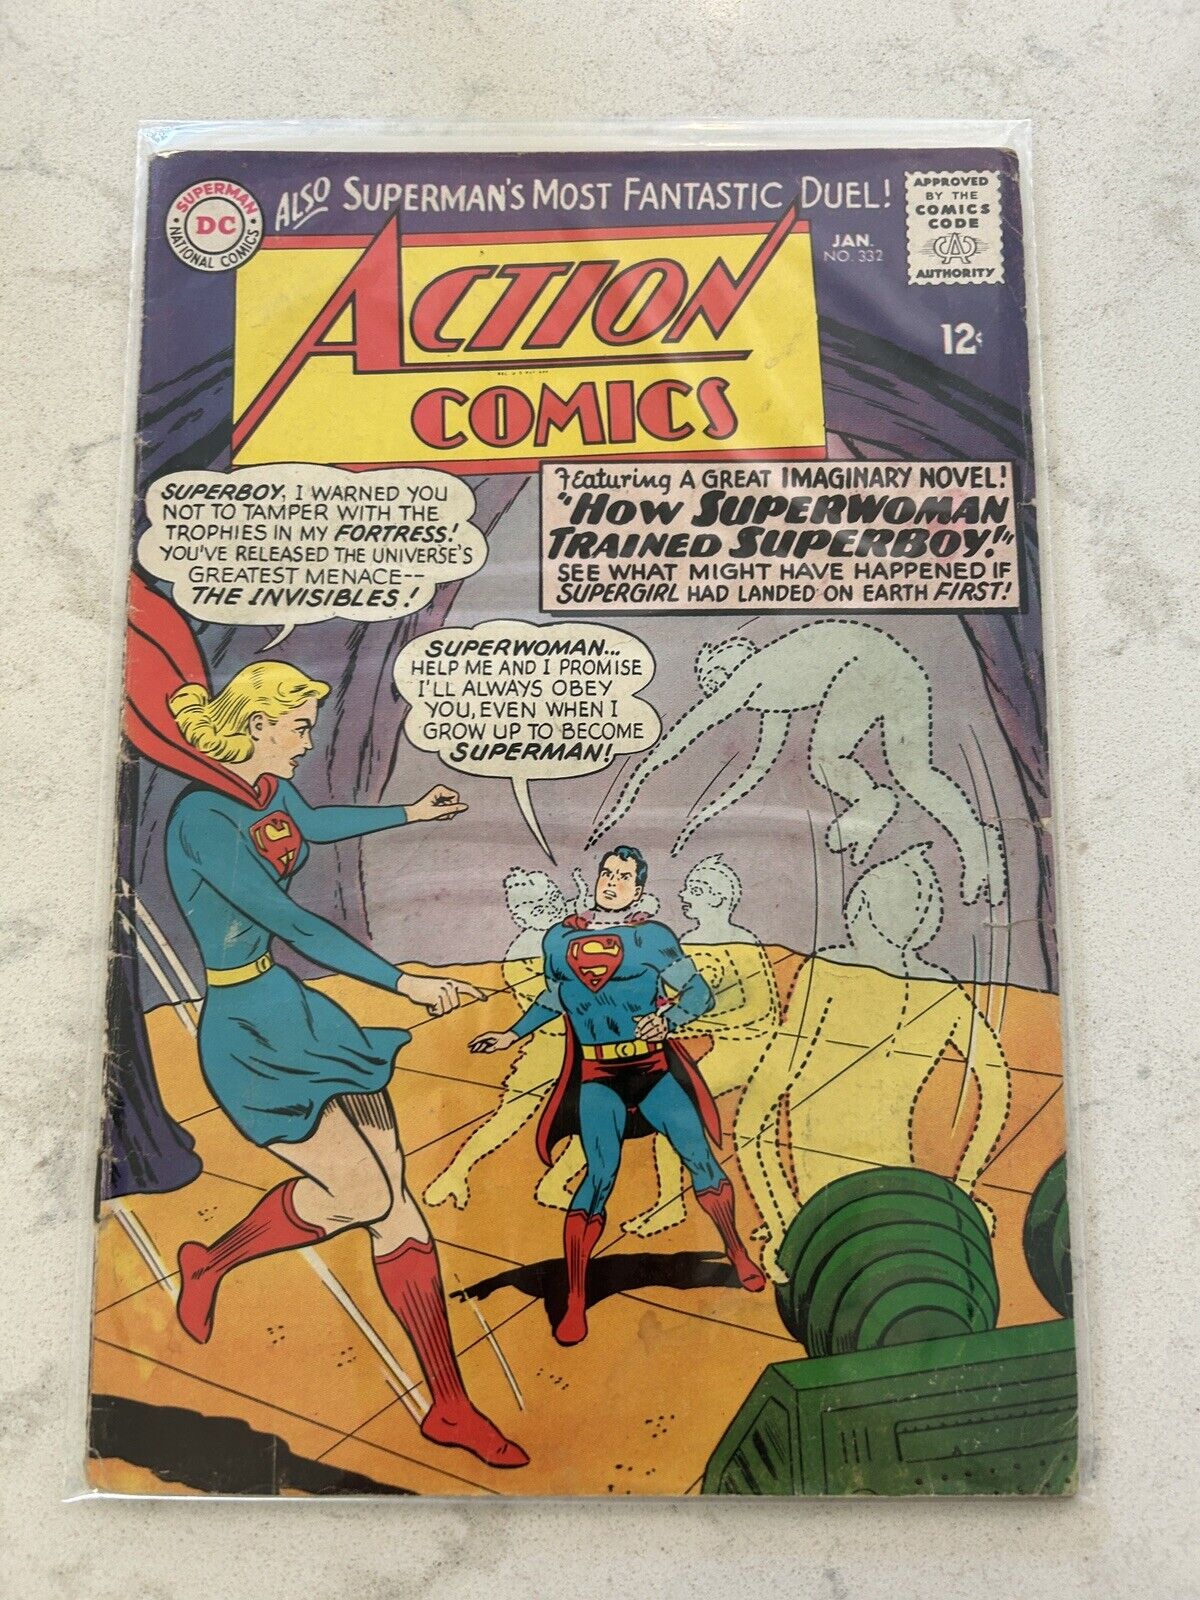 Action Comics #332 (1966) Curt Swan Cover